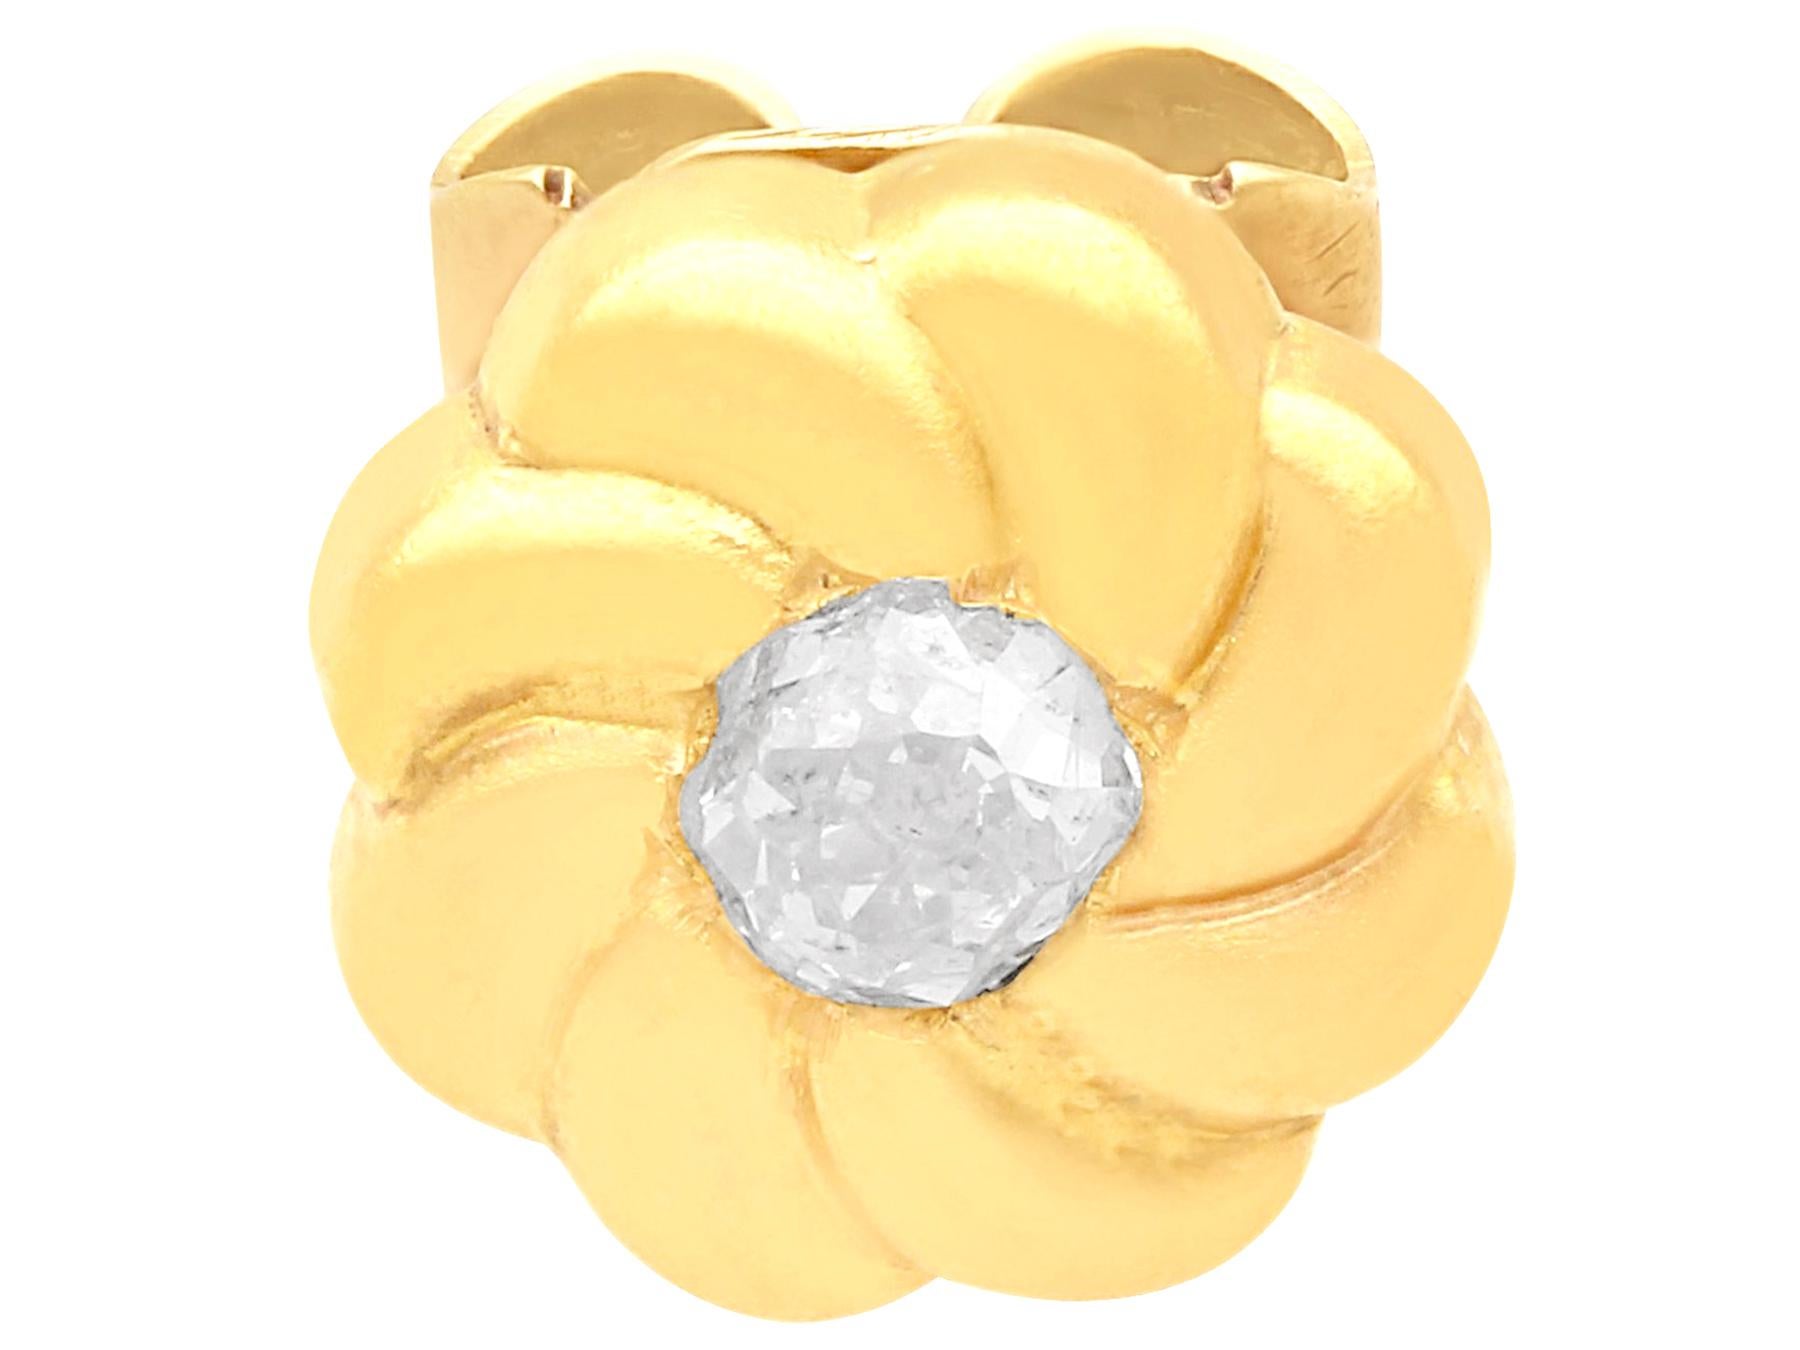 A fine and impressive pair of antique 0.12 carat diamond and 18 karat yellow gold stud earrings; part of our antique jewelry and estate jewelry collections.

These fine antique diamond earrings have been crafted in 18k yellow gold.

Each circular,